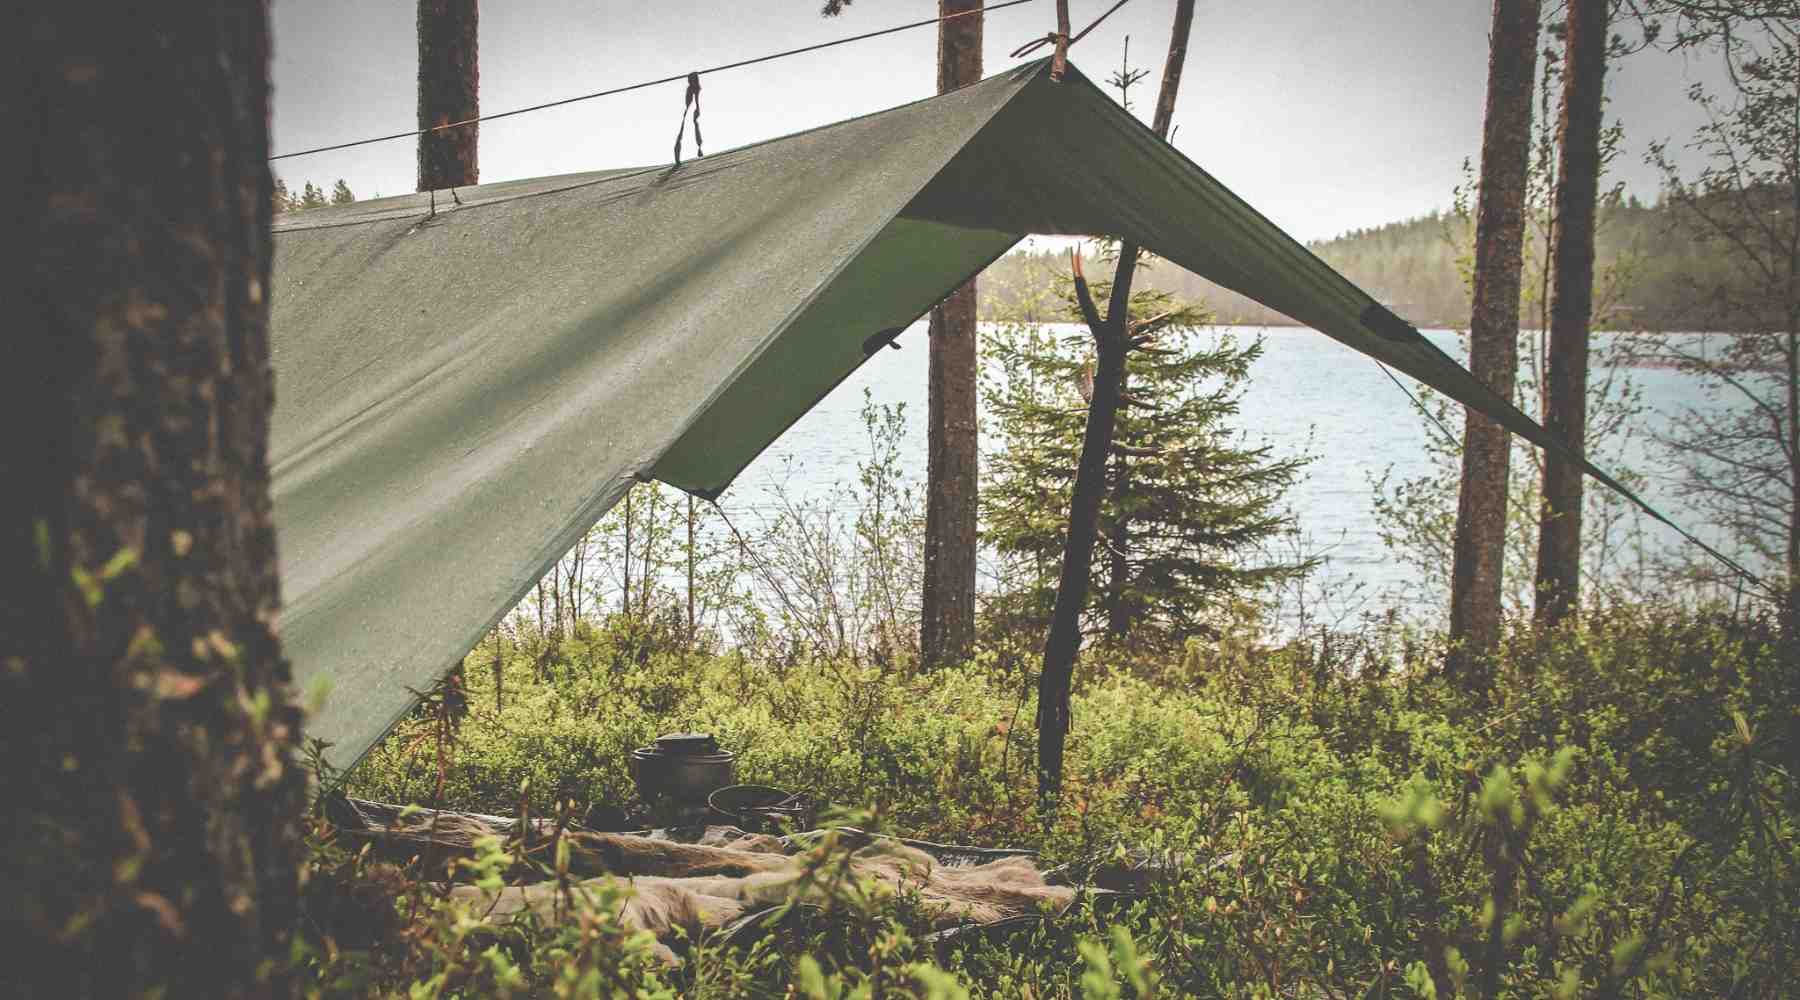 Picture of tent out in nature